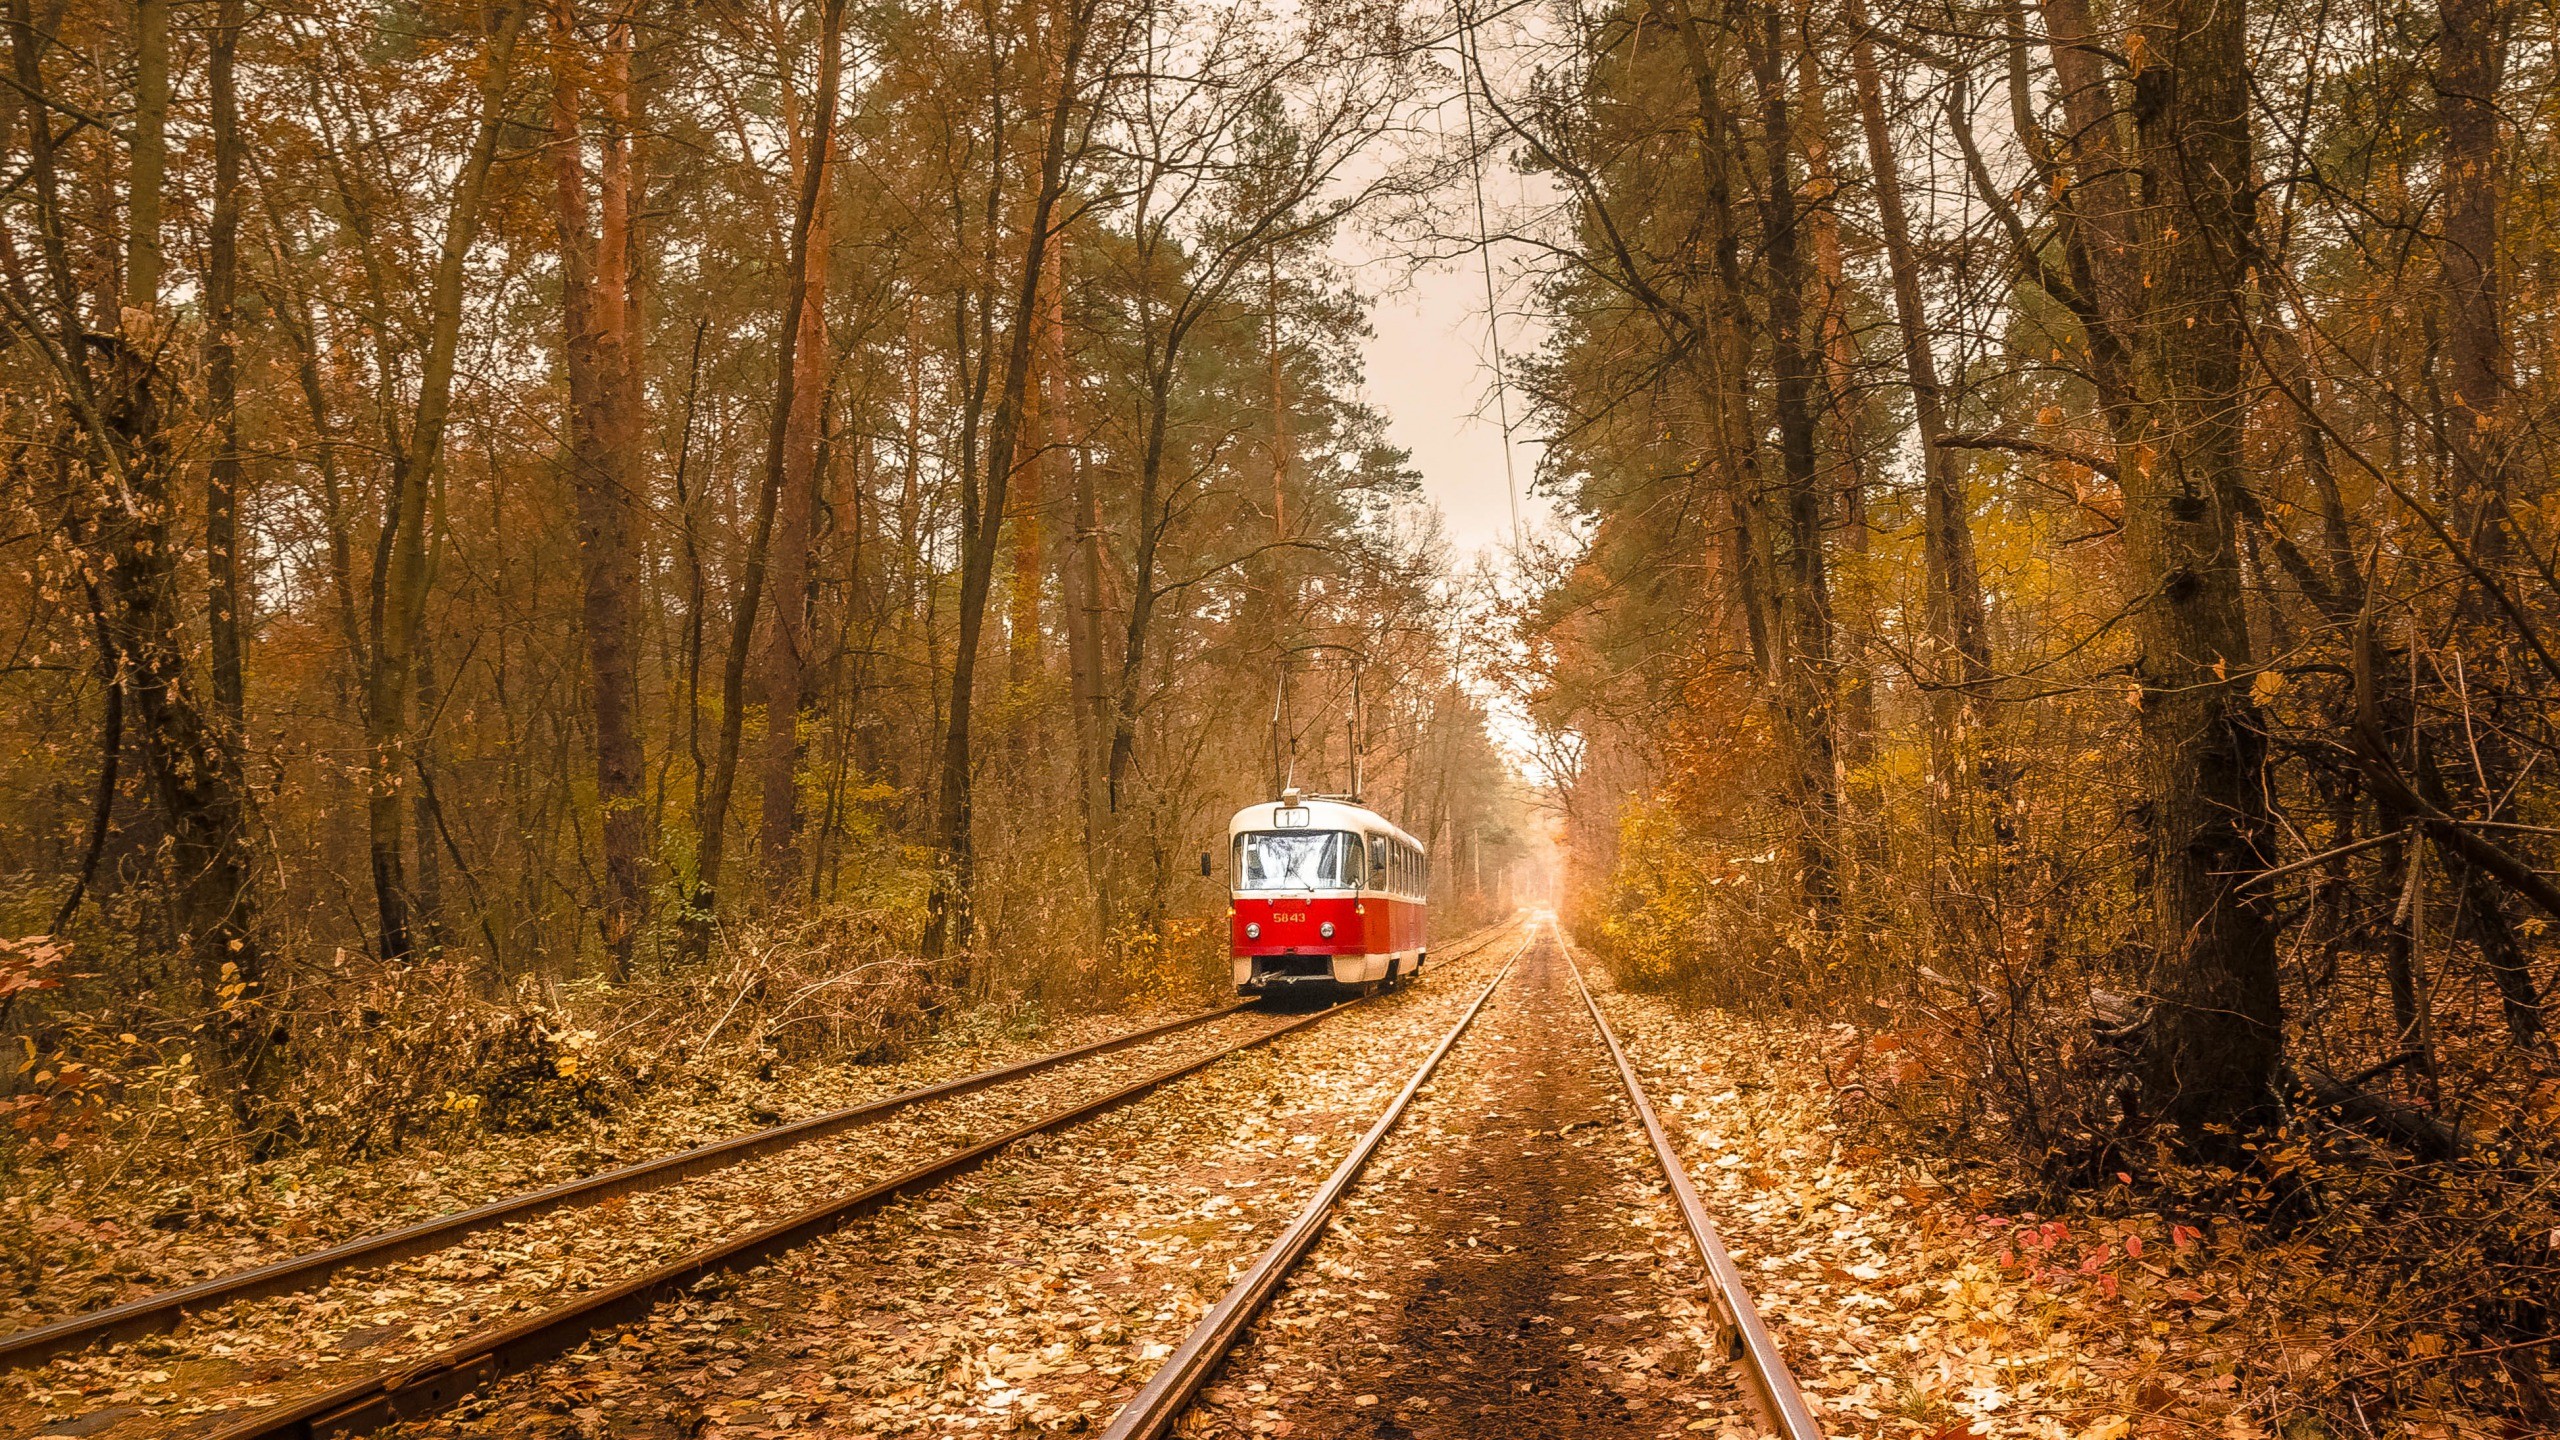 Nature Trees Leaves Vehicle Tram Railway Rail Yard Forest Branch Fall Electricity Wire Ukraine 2560x1440